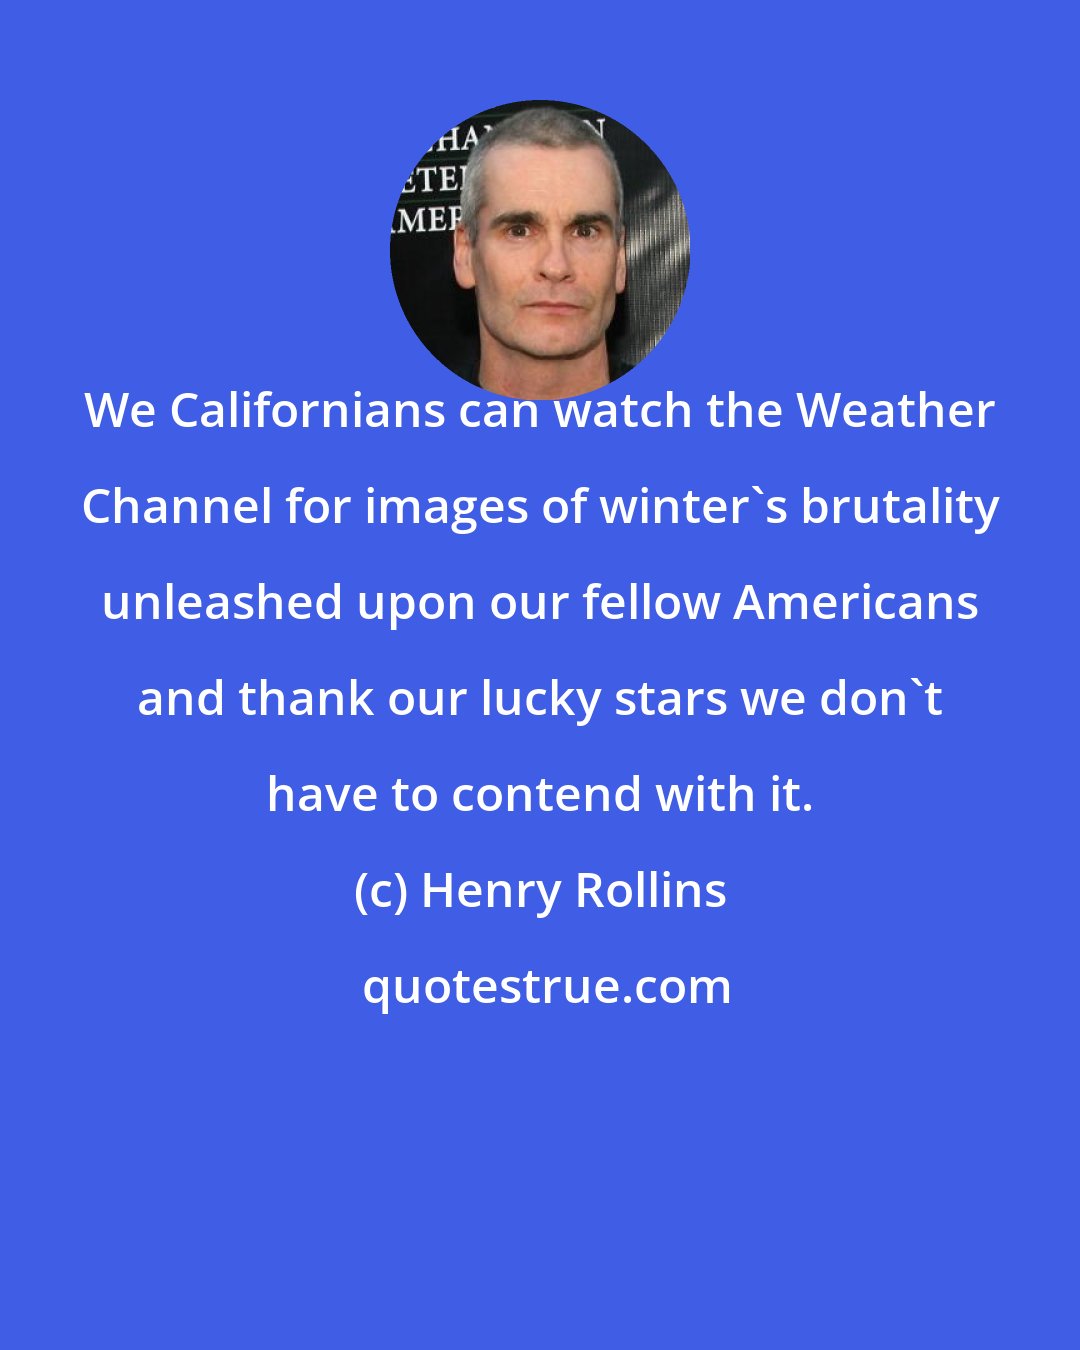 Henry Rollins: We Californians can watch the Weather Channel for images of winter's brutality unleashed upon our fellow Americans and thank our lucky stars we don't have to contend with it.